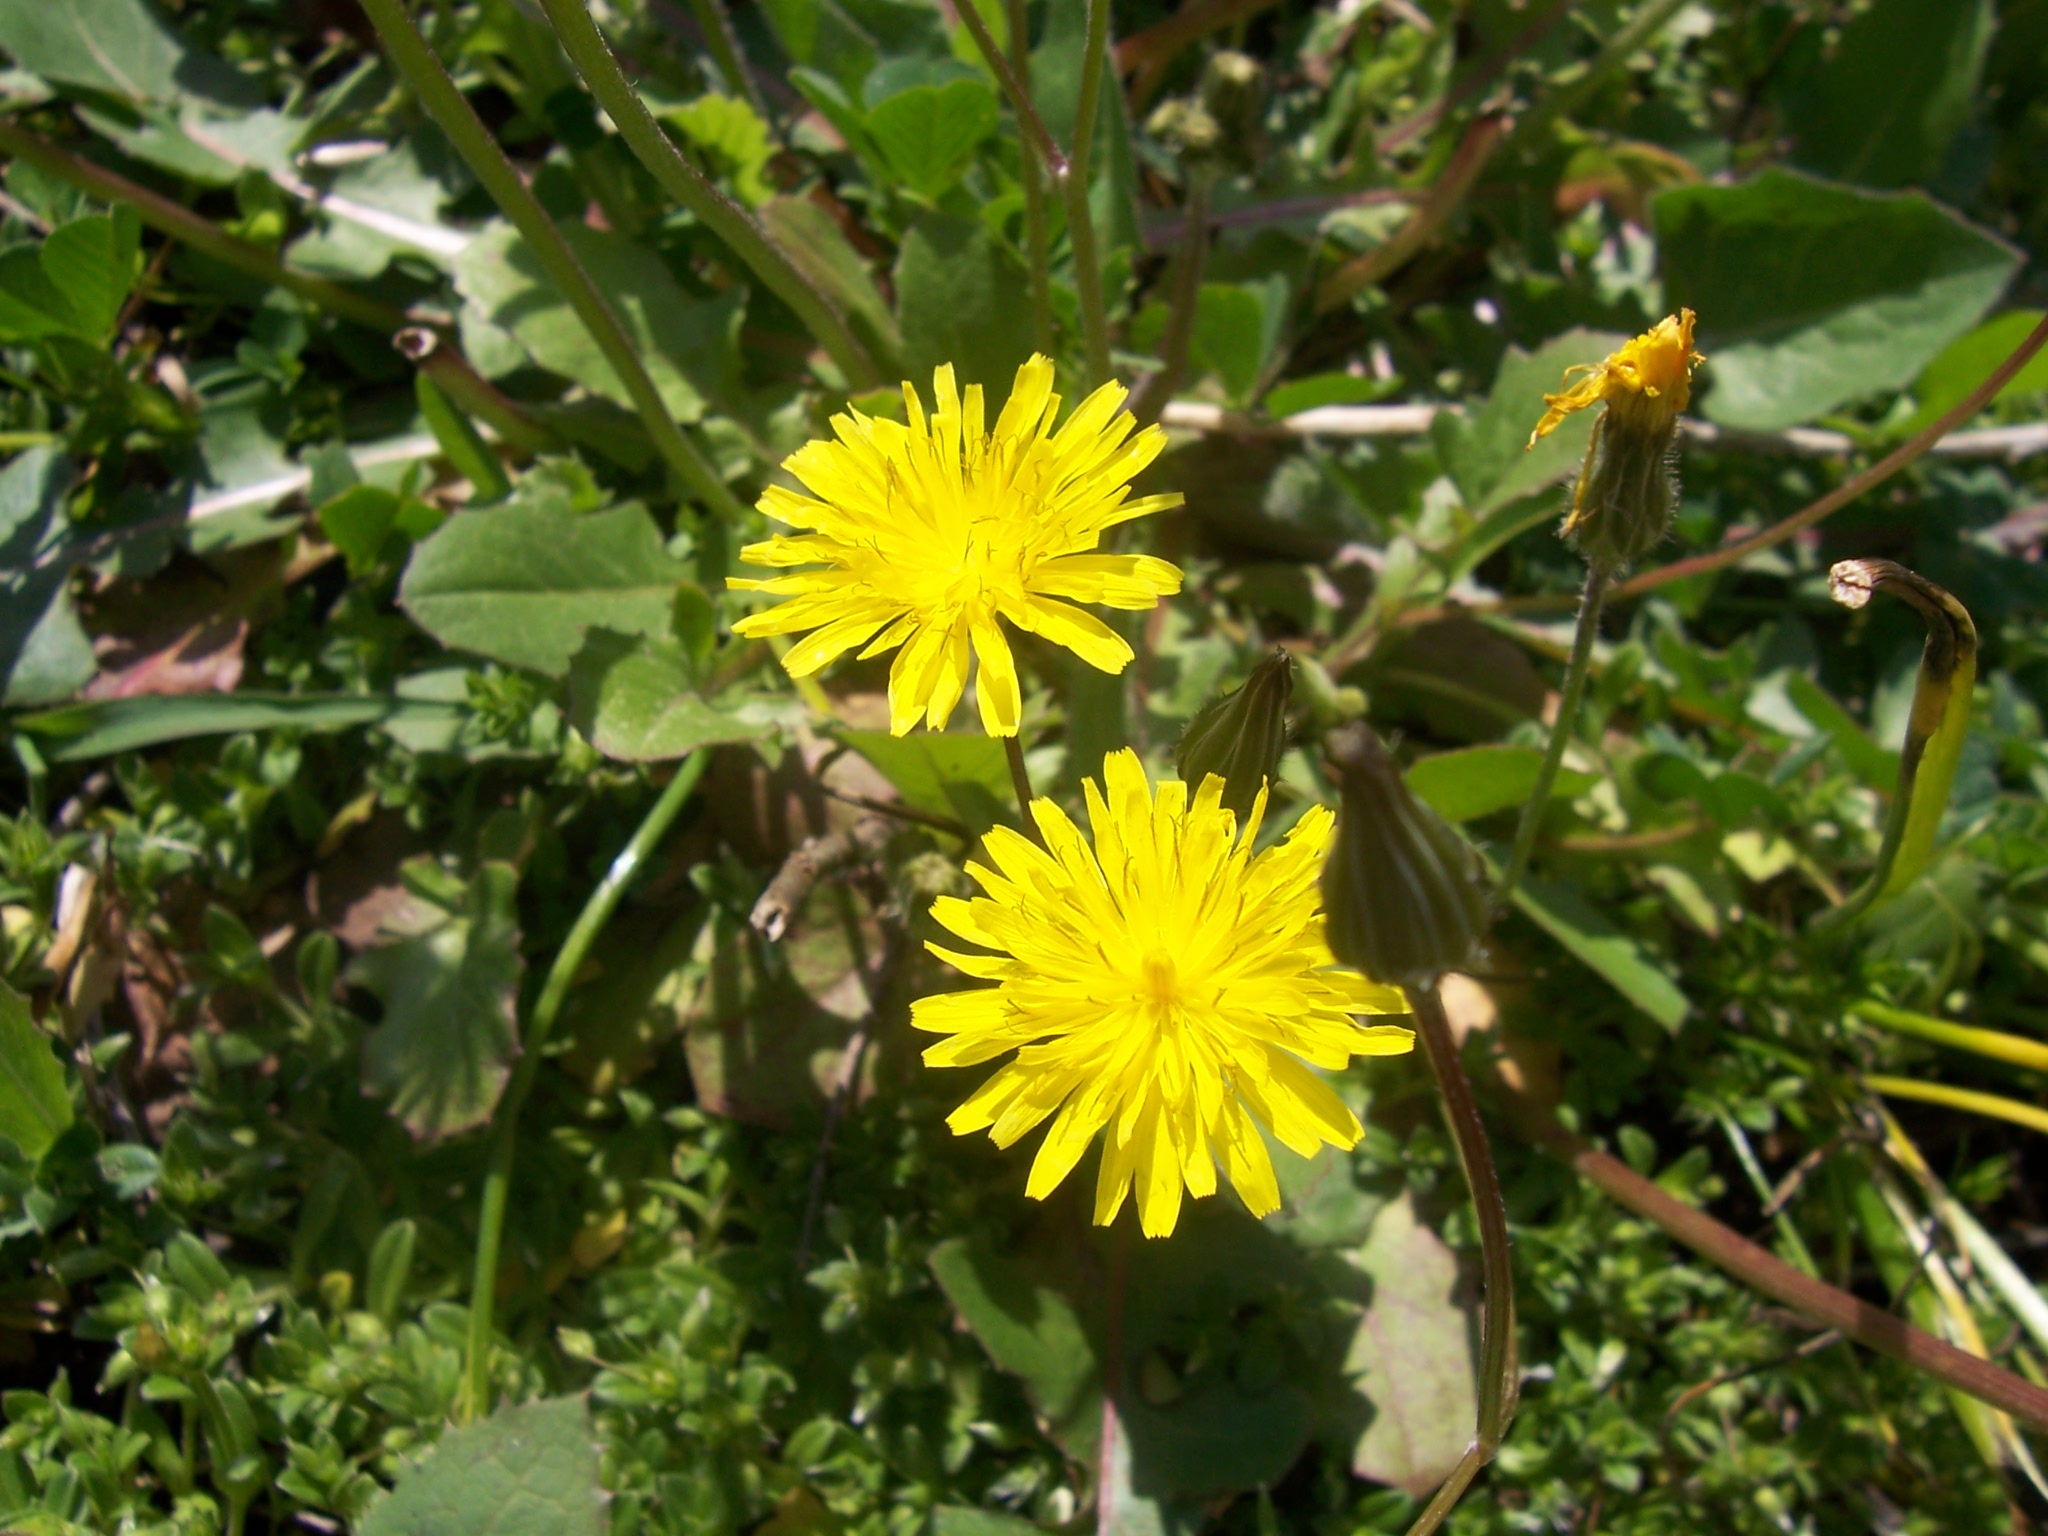 yellow flowers with green leaves and other plants in the background